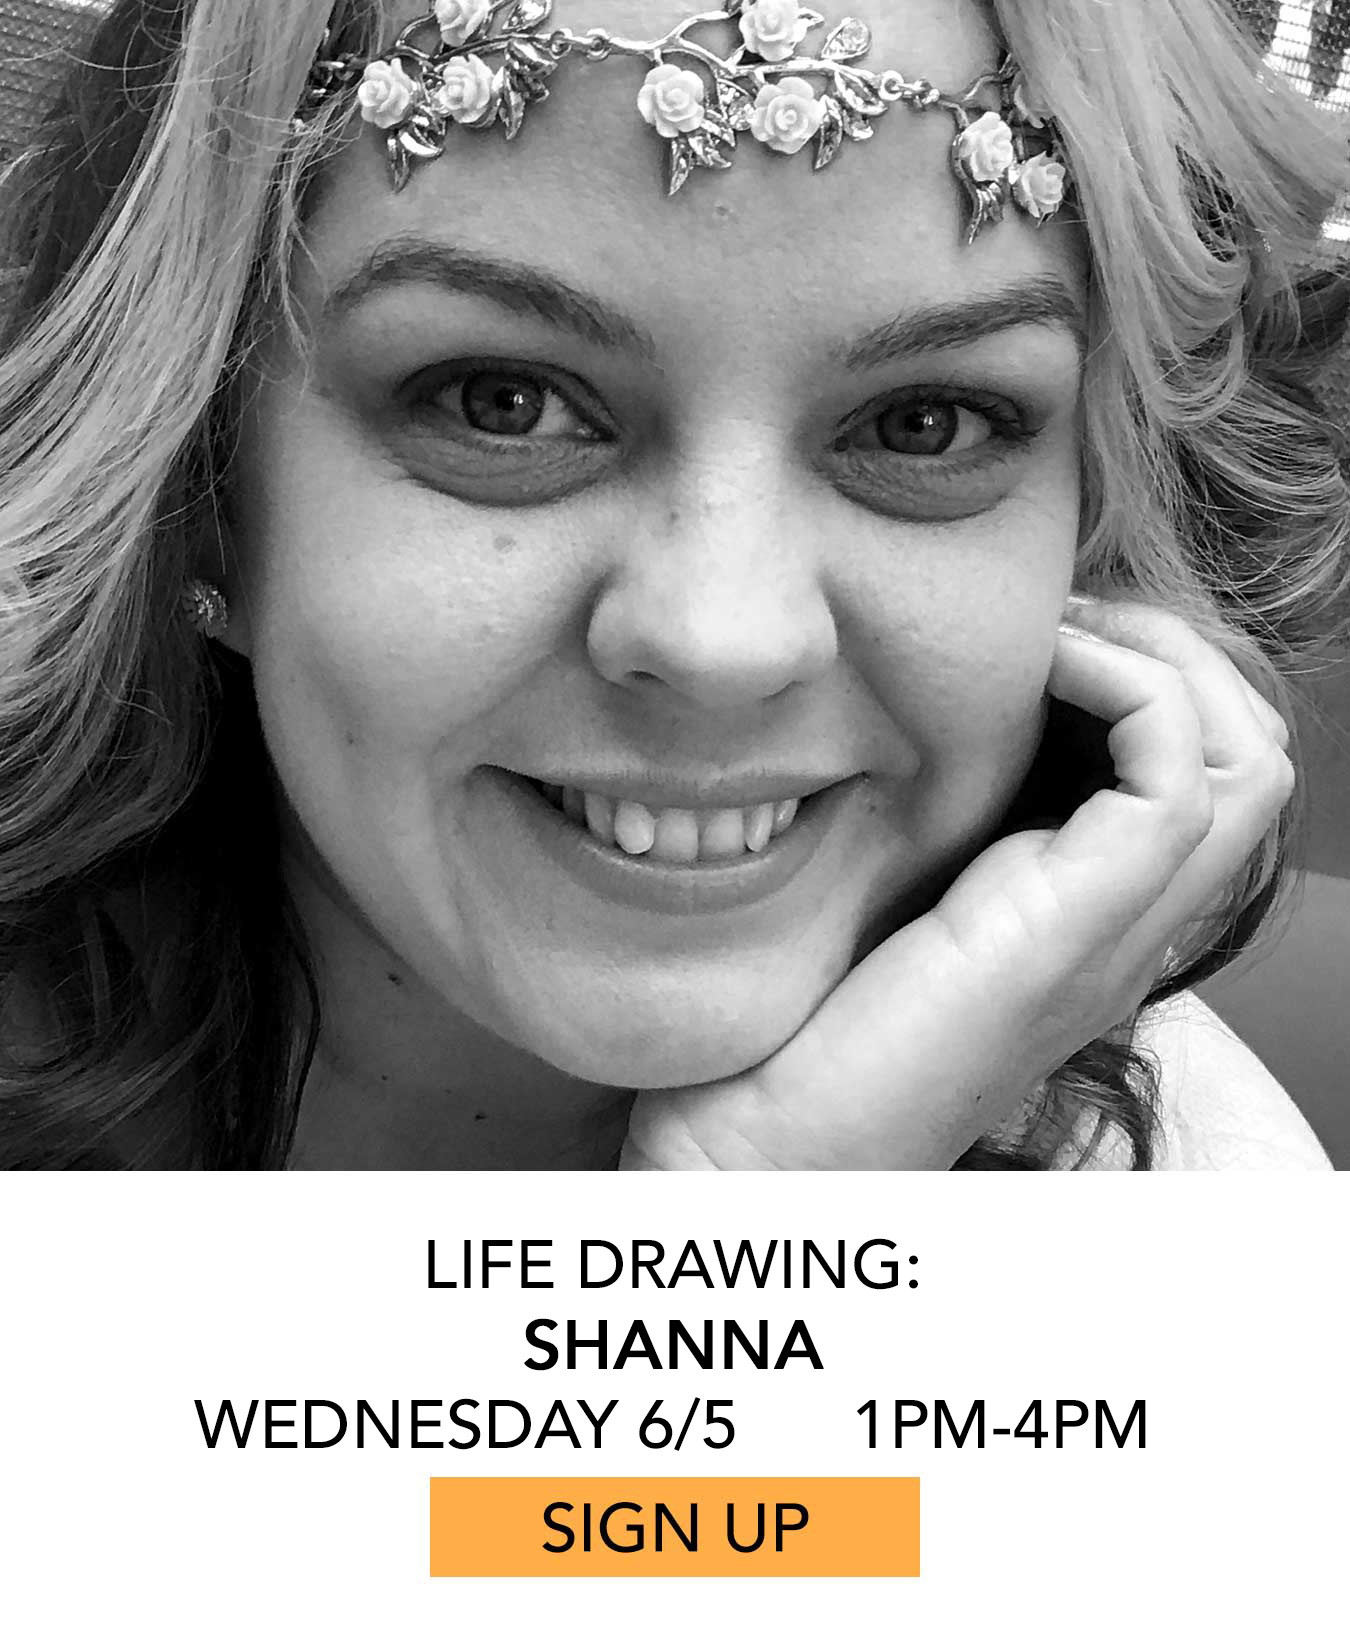 Life Drawing: Shanna. Wednesday 6/5 from 1pm to 4pm. Click to Sign Up.